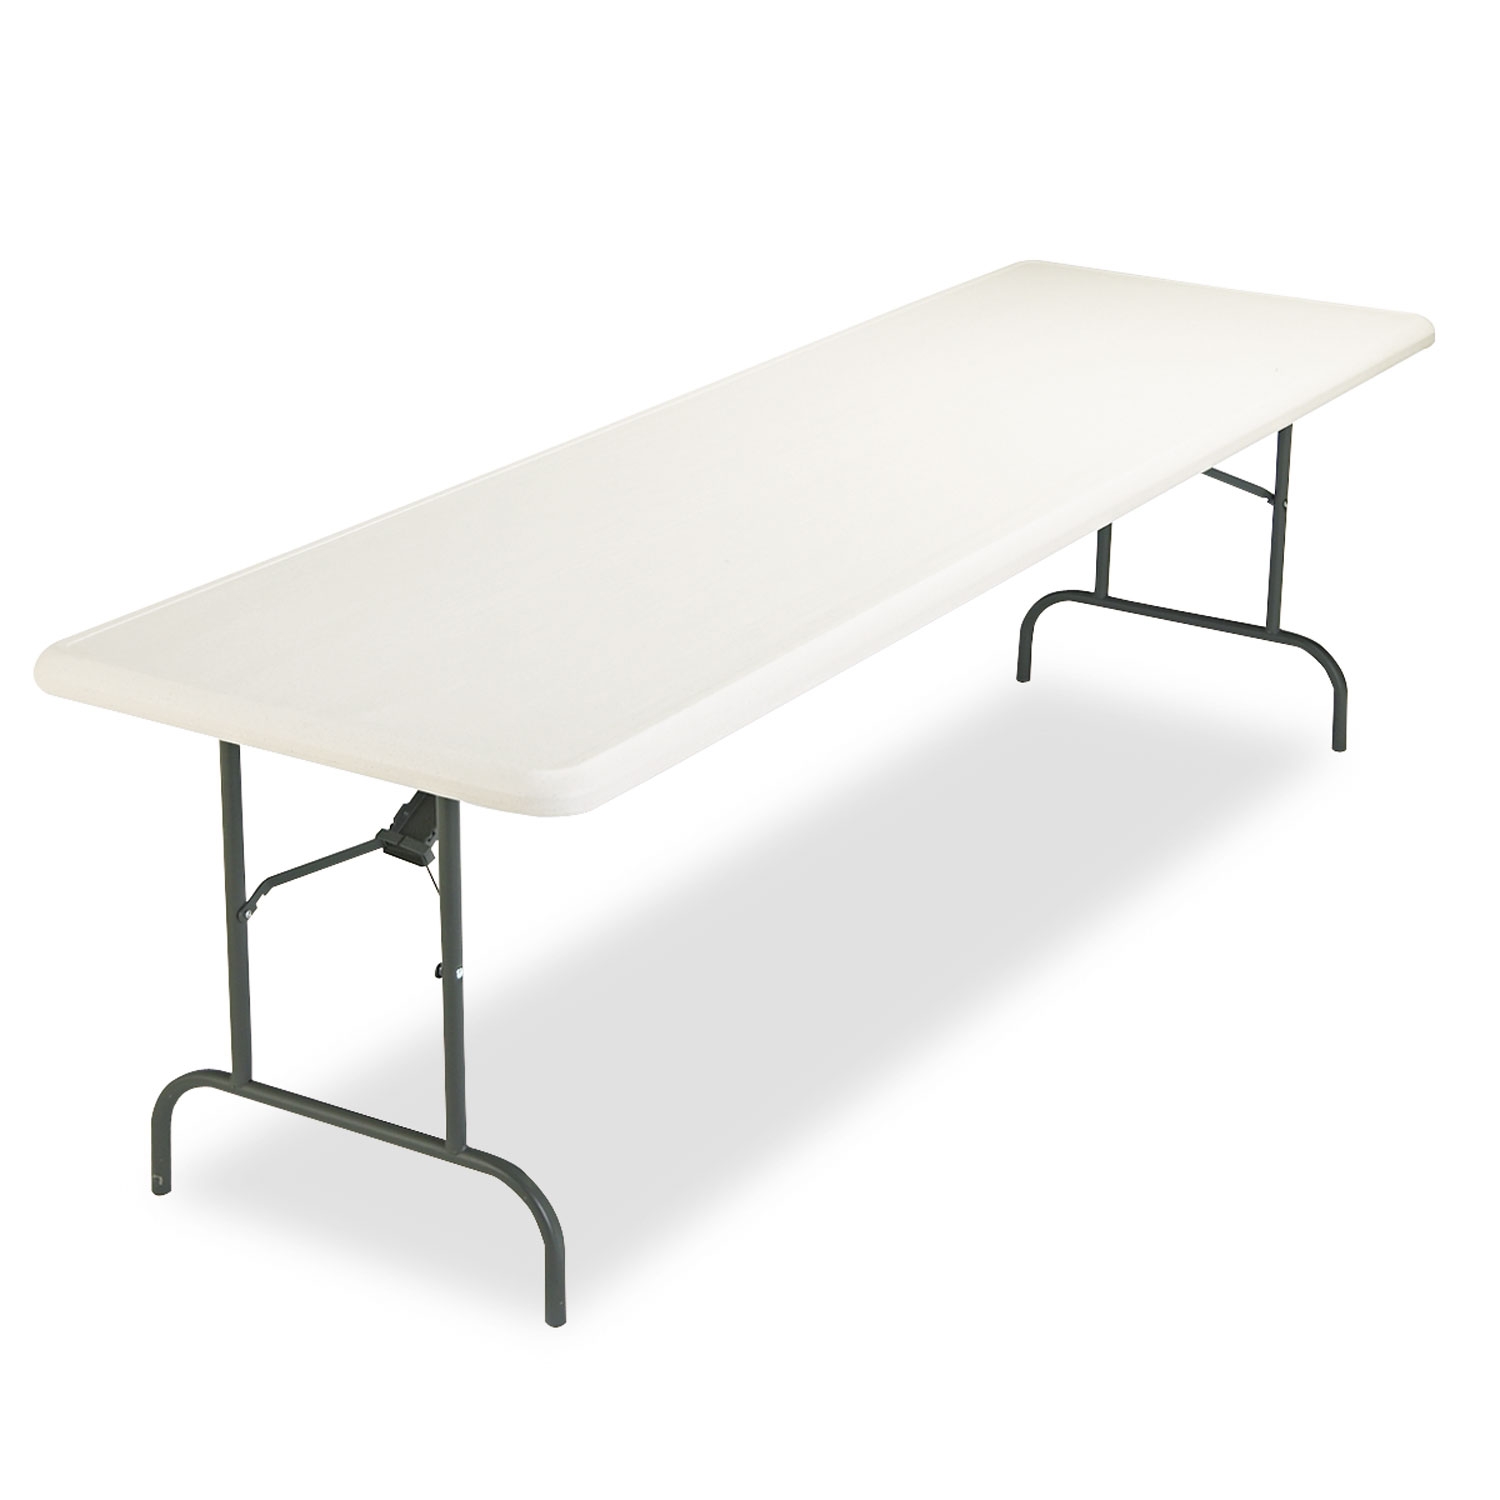 Iceberg ICE65233 IndestrucTables Too 1200 Series Resin Folding Table, 96w x 30d x 29h, Platinum